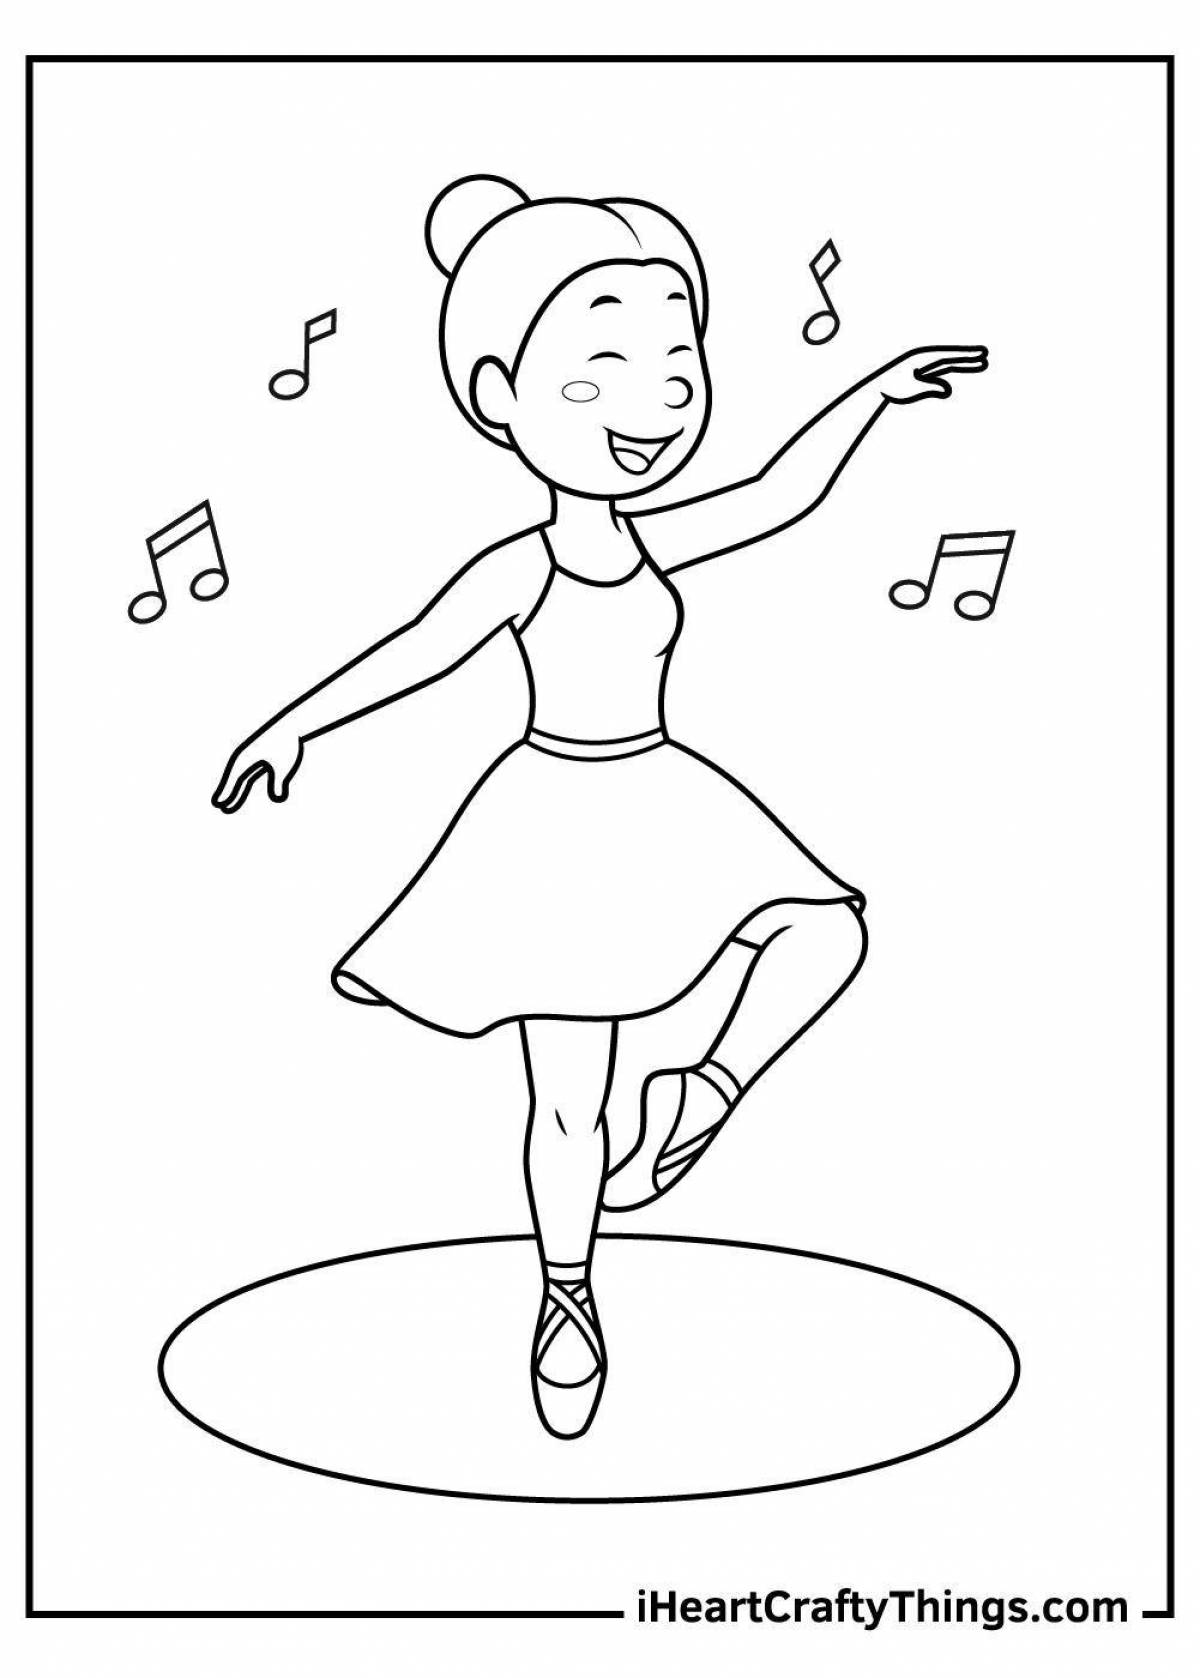 Magic dancing coloring pages for kids